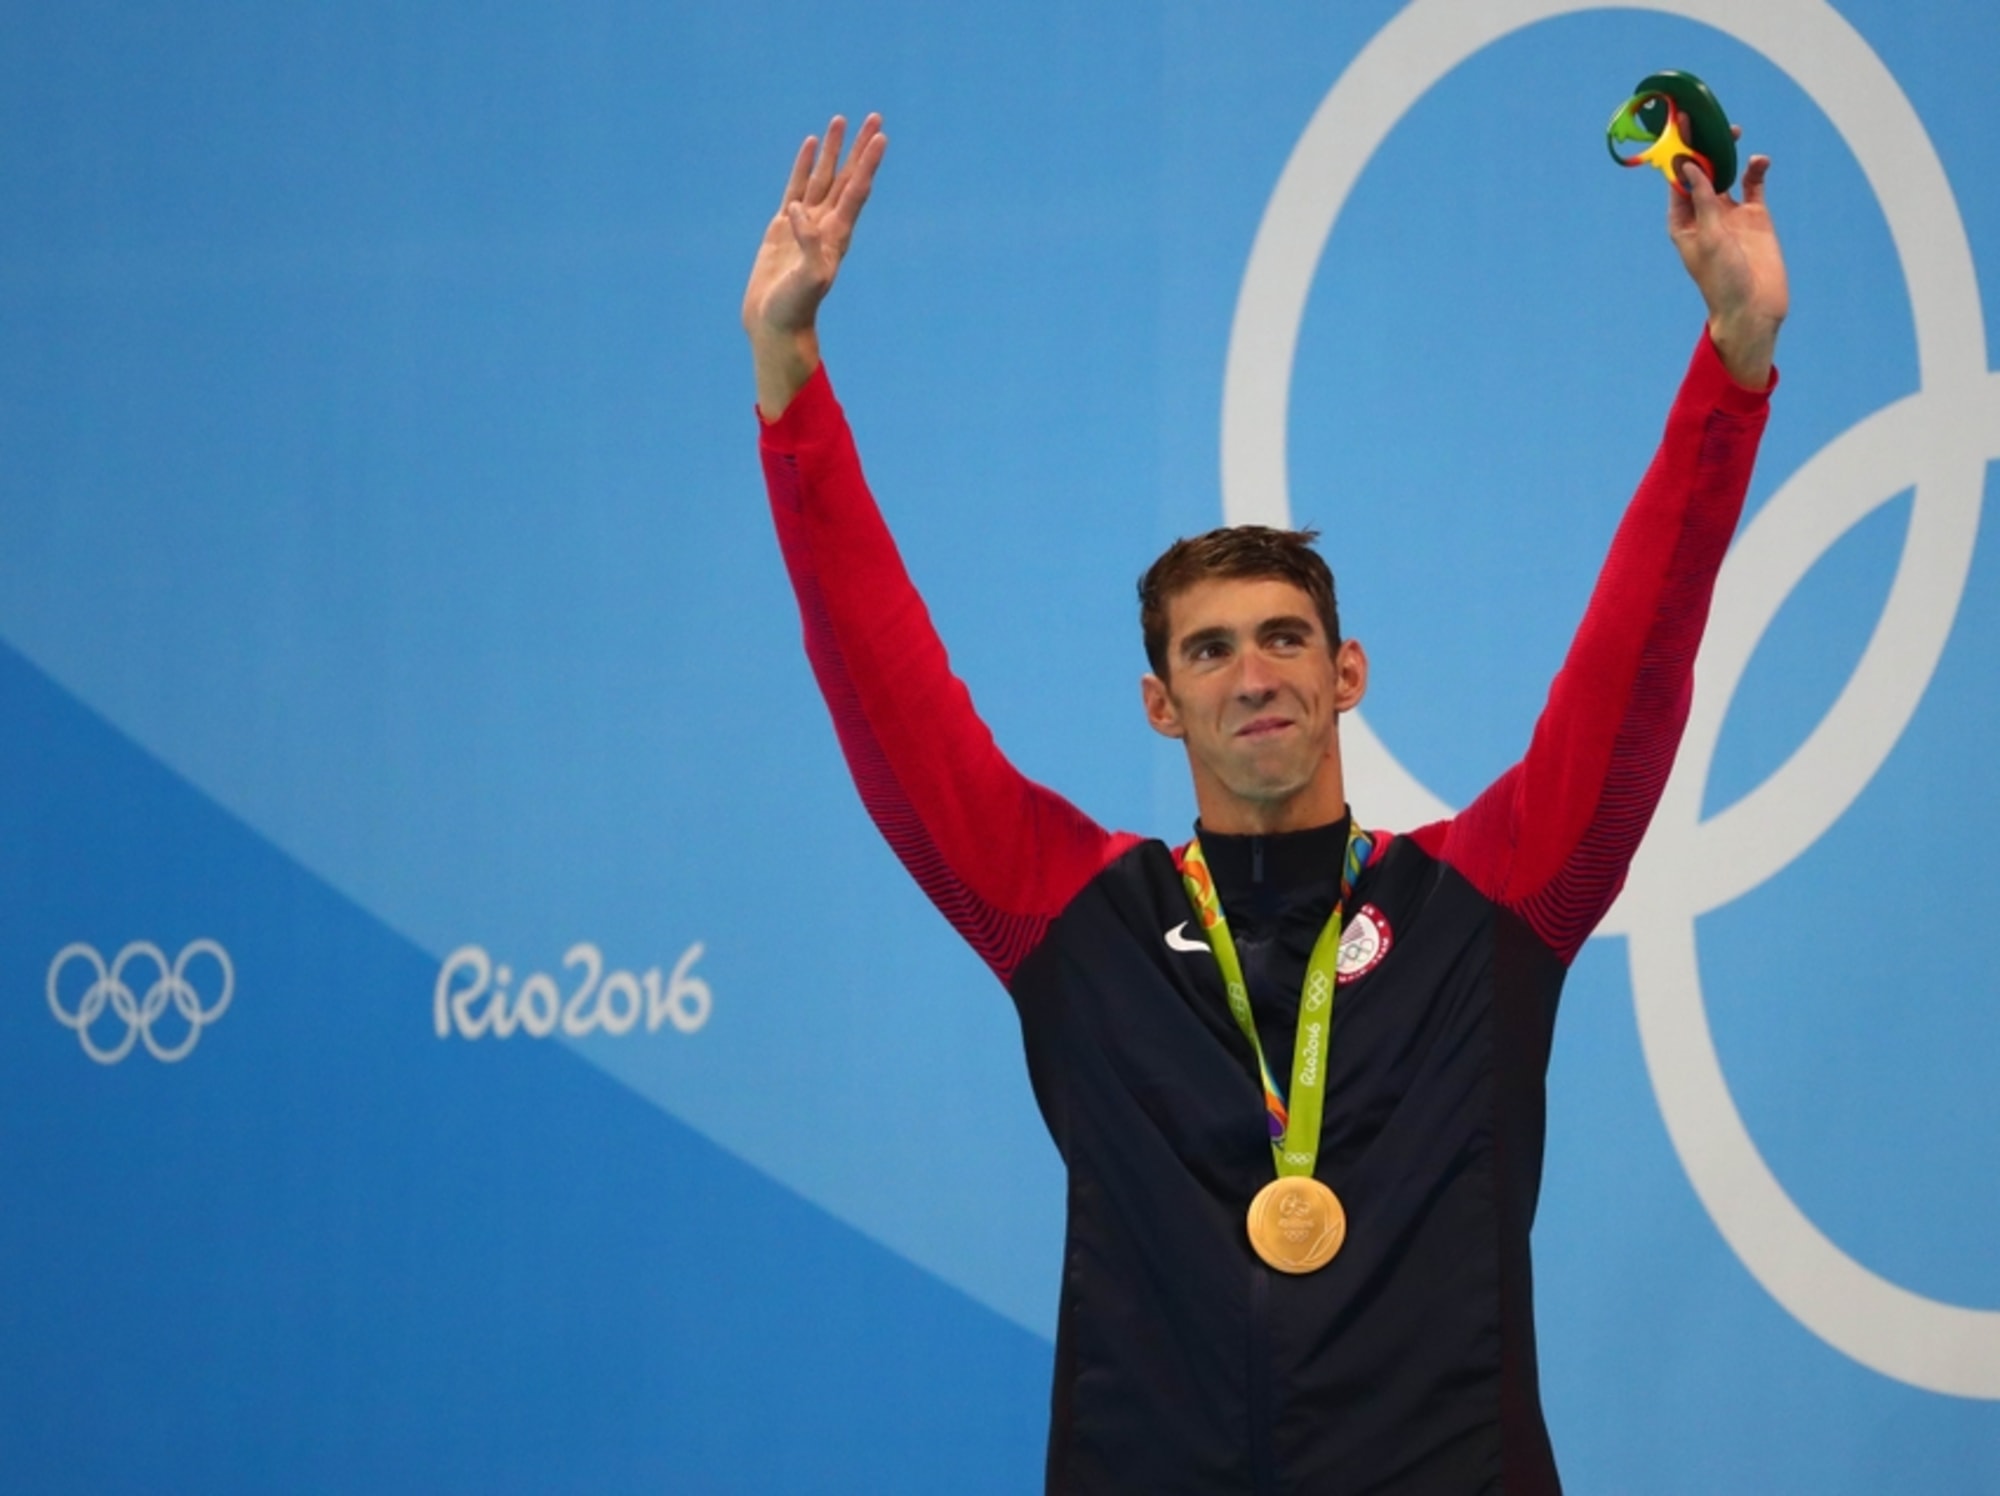 List Of Every Medal Won By Michael Phelps